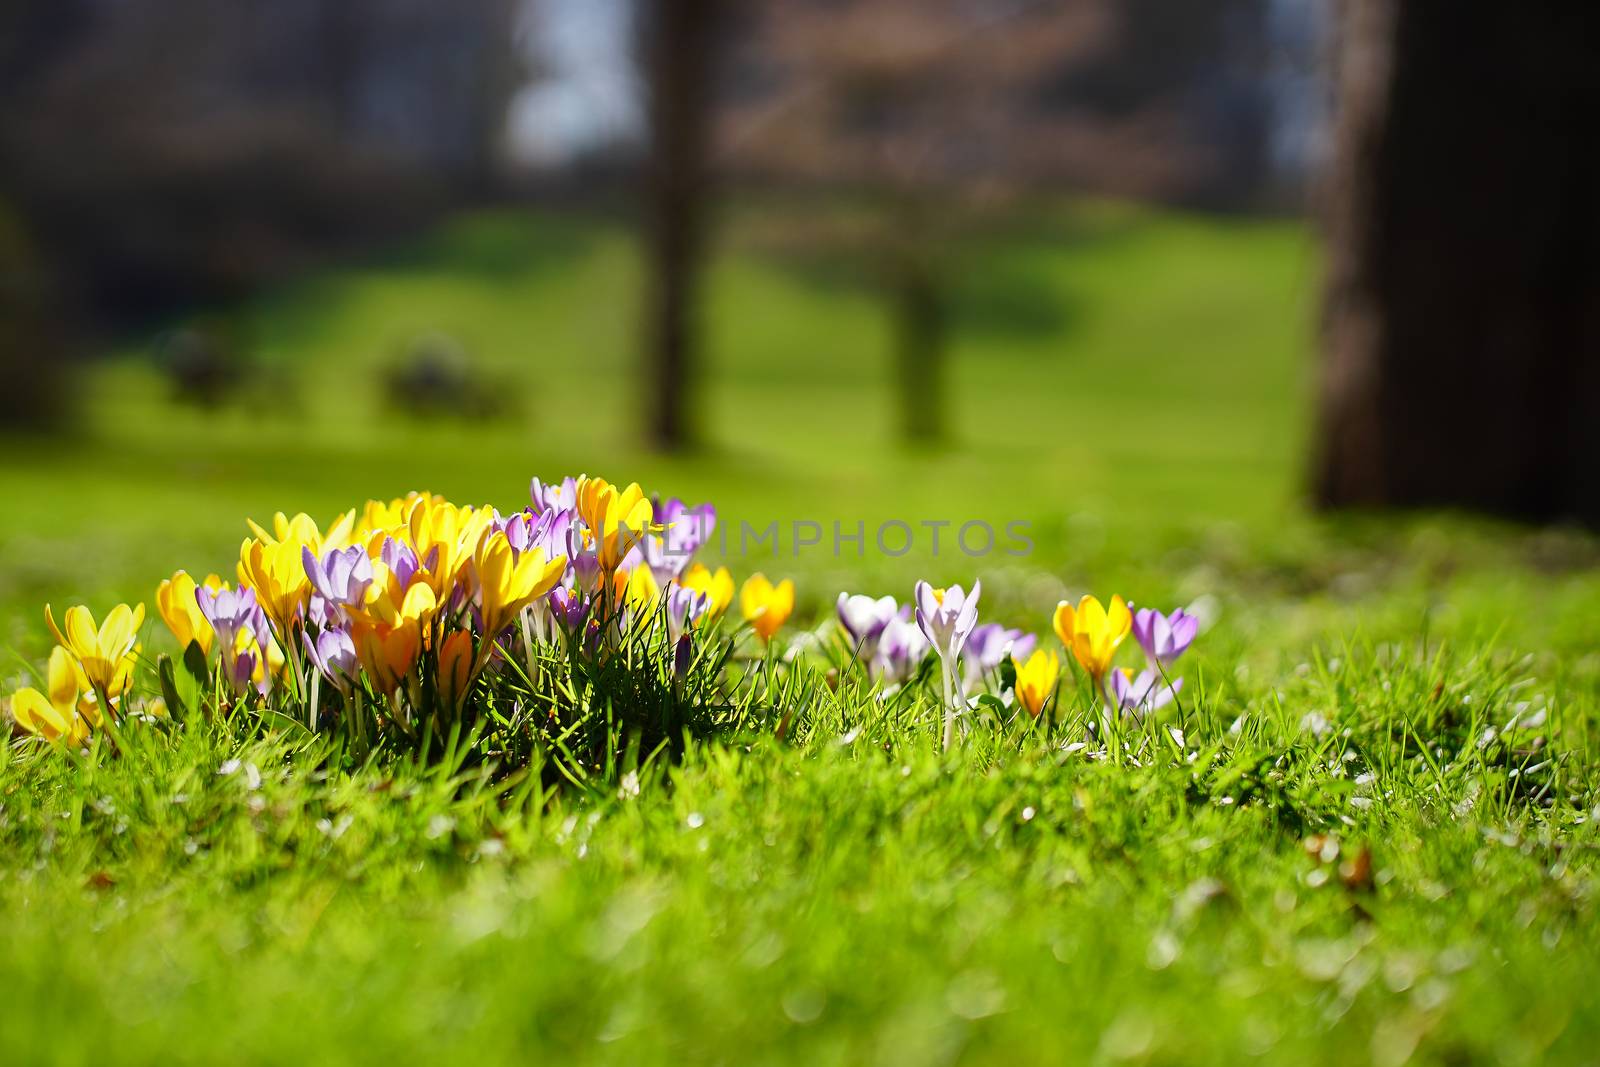 yellow and purple crocuses growing on the ground in early spring.